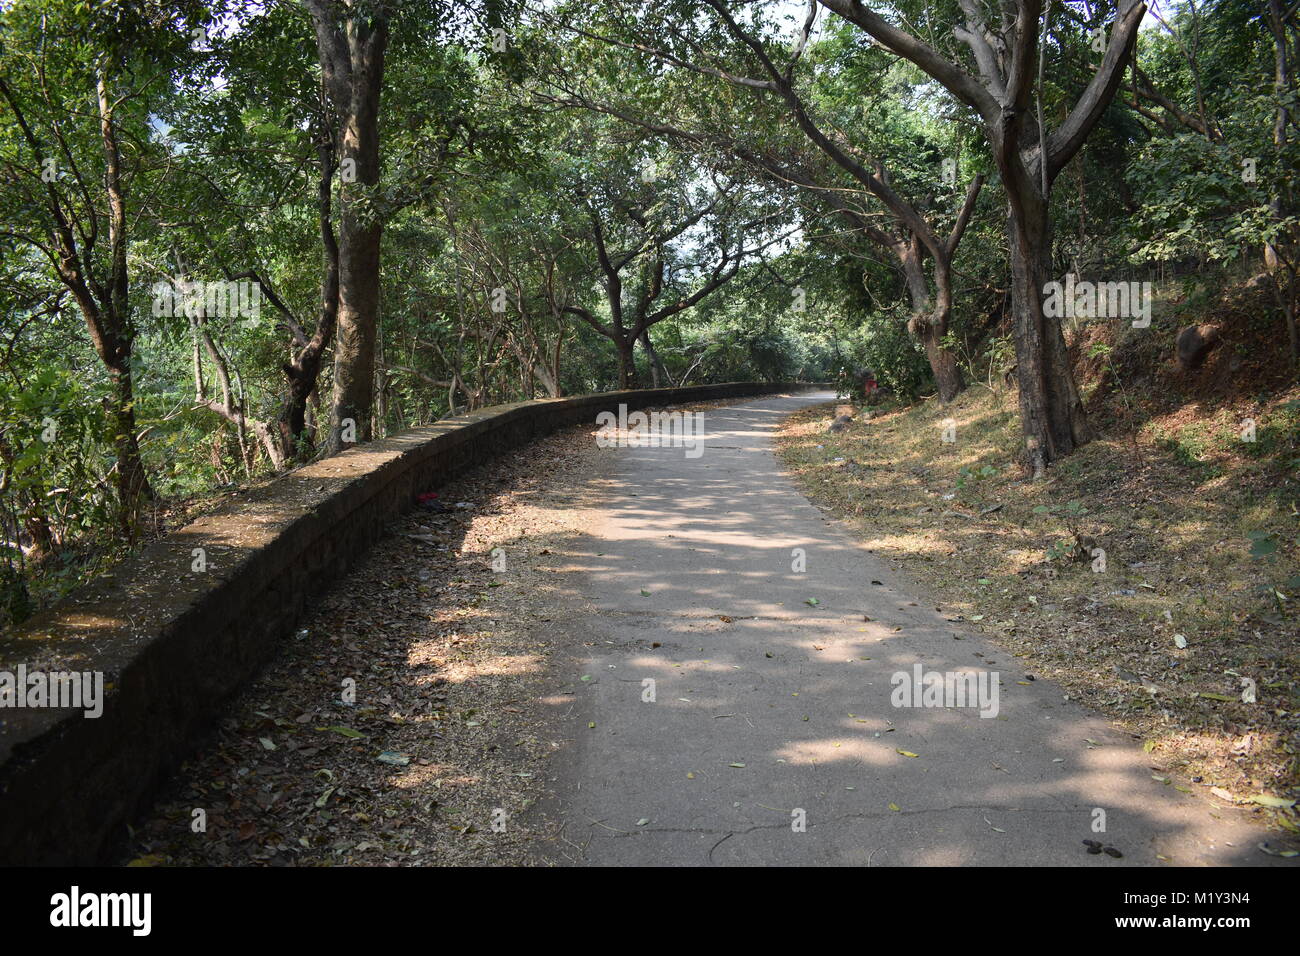 A public pathway looking awesome in sun shine. Stock Photo